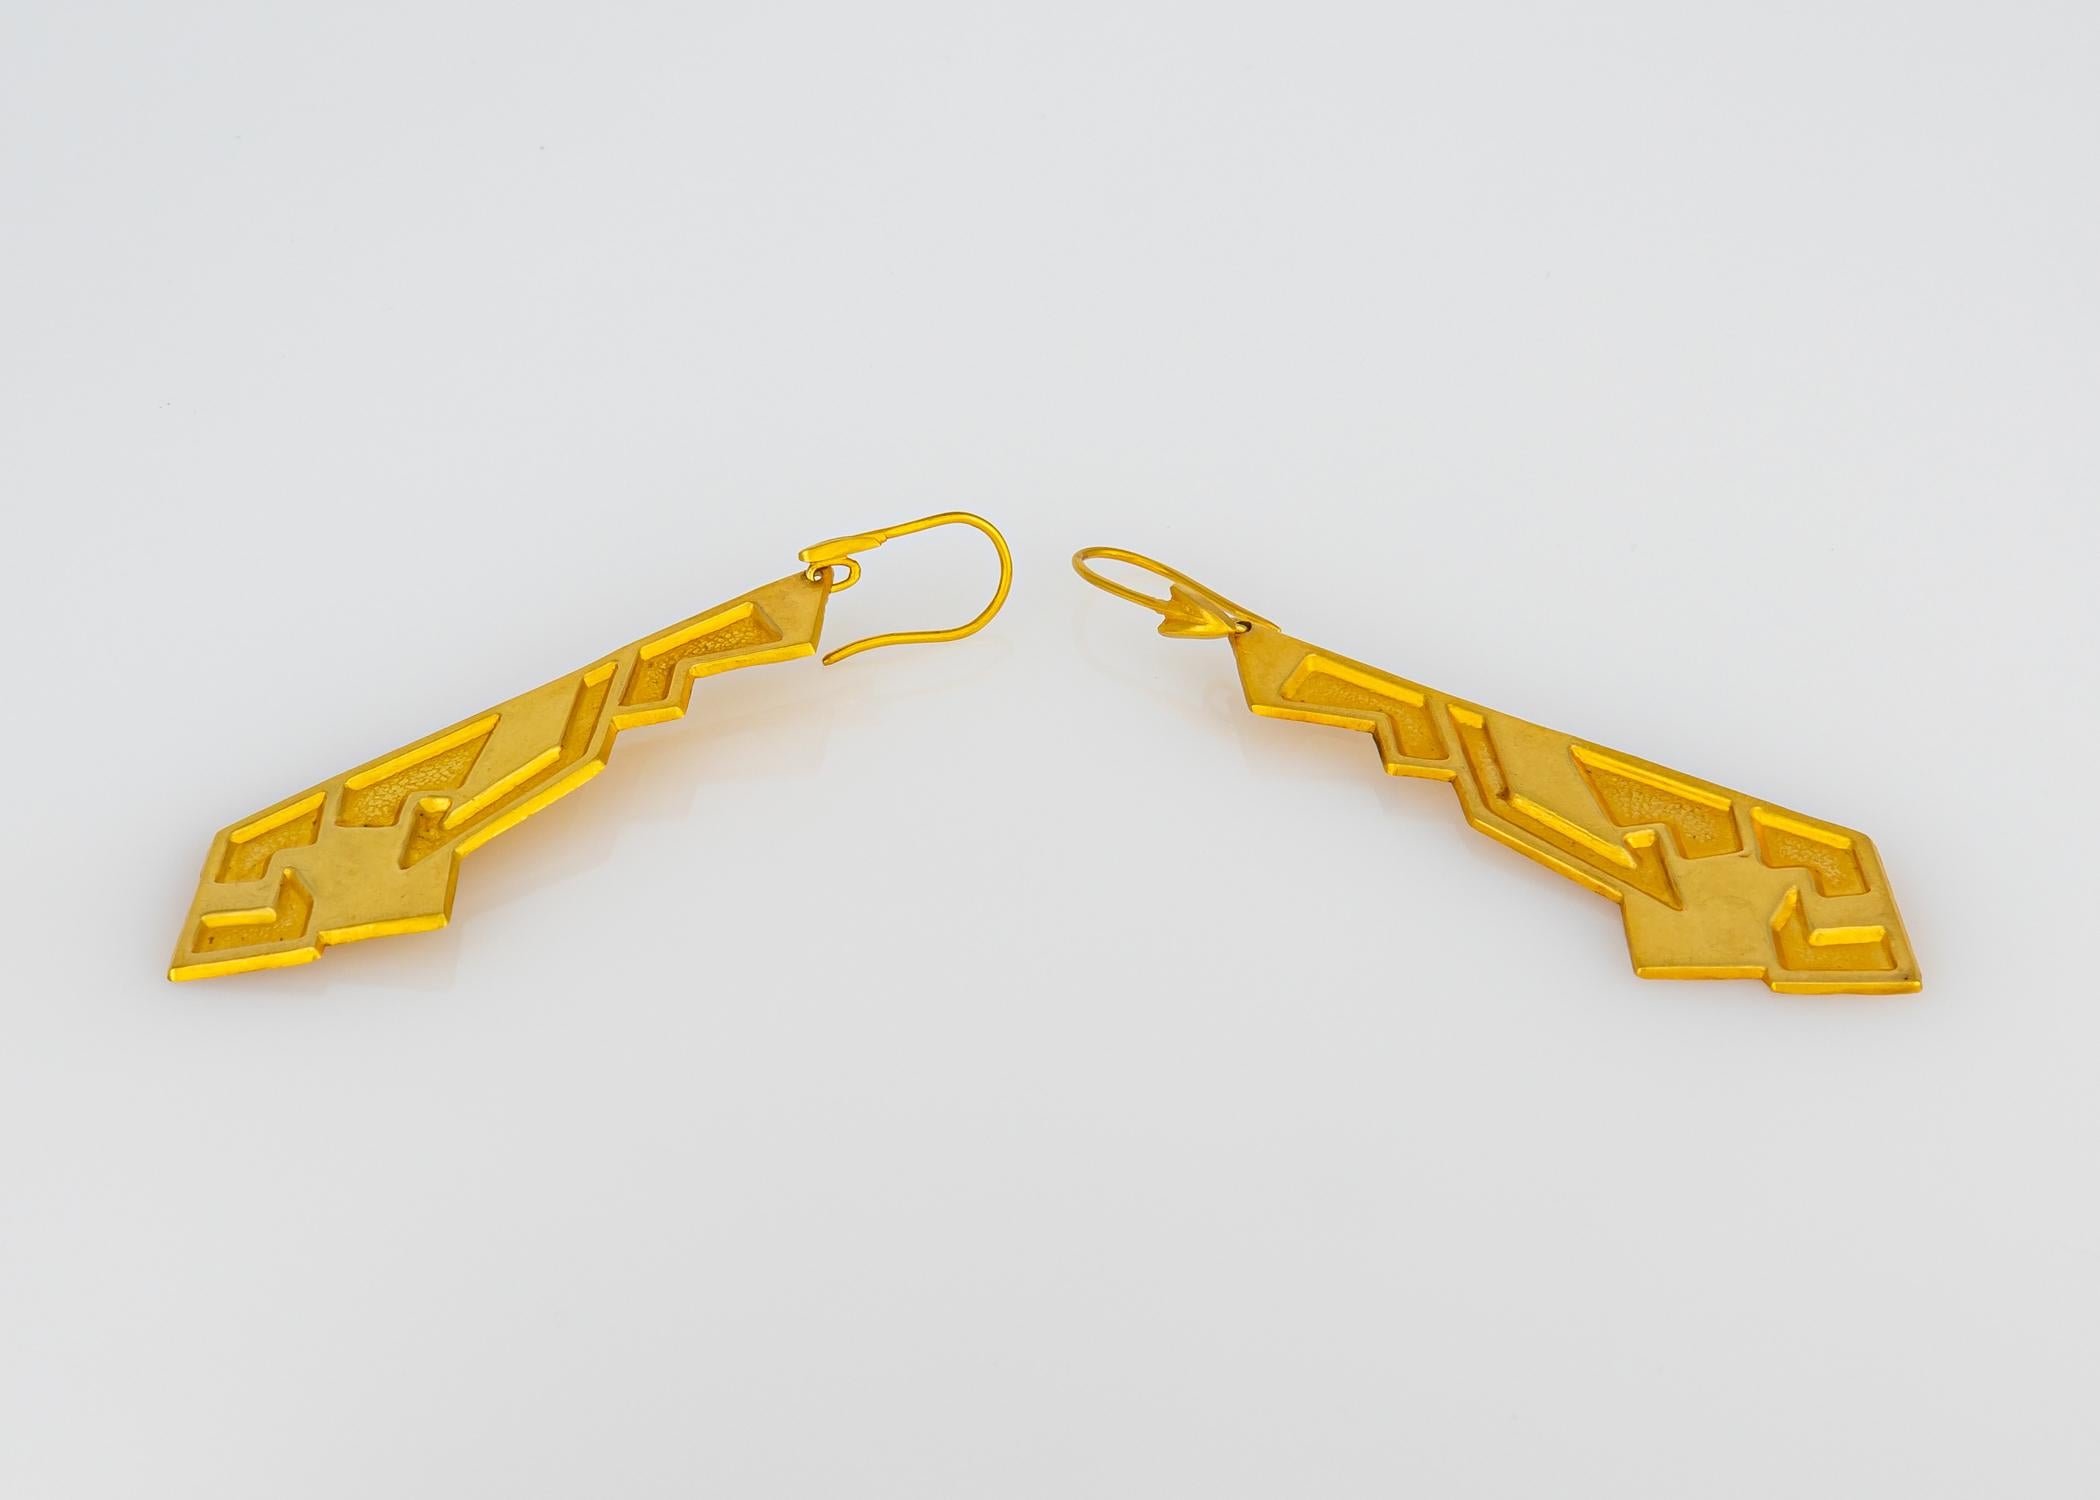 Lalaounis drop earrings are not often available. This beautiful geometric design will be great casual or dress it up for evening. Lightweight comfortable at just over 2 1/2 inches.